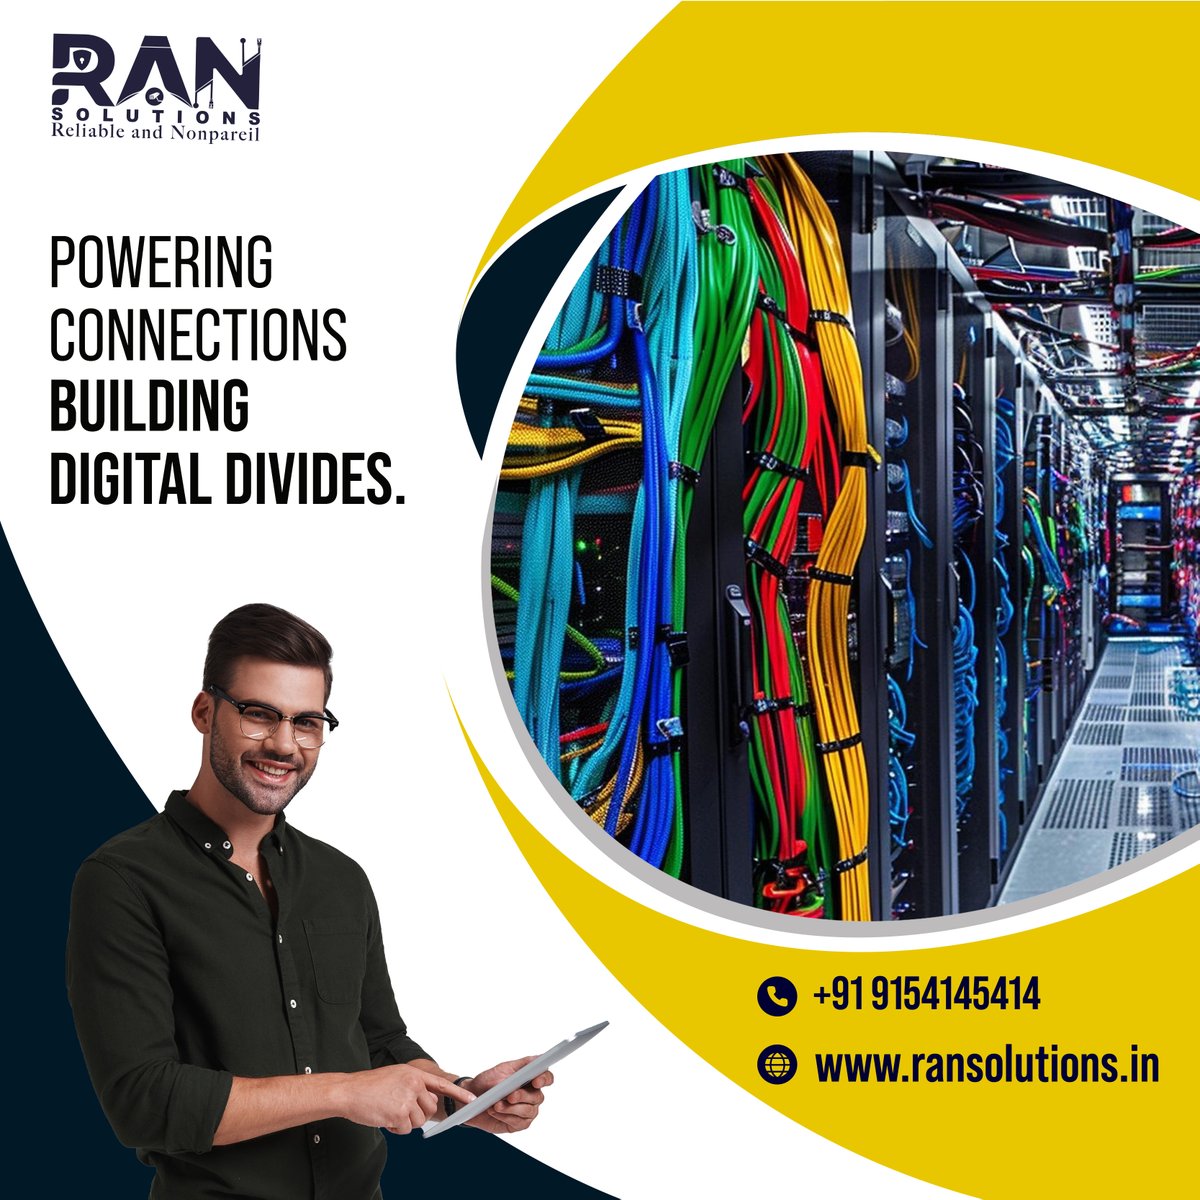 Ran Solutions is enhancing connectivity and tackling digital divides. Discover how our services are creating a more equitable digital world.
#ransolutions #digitaldivide #inclusivetech #digitaltransformation #techinnovation #digitaltransformation #digitalstrategy #surveillance